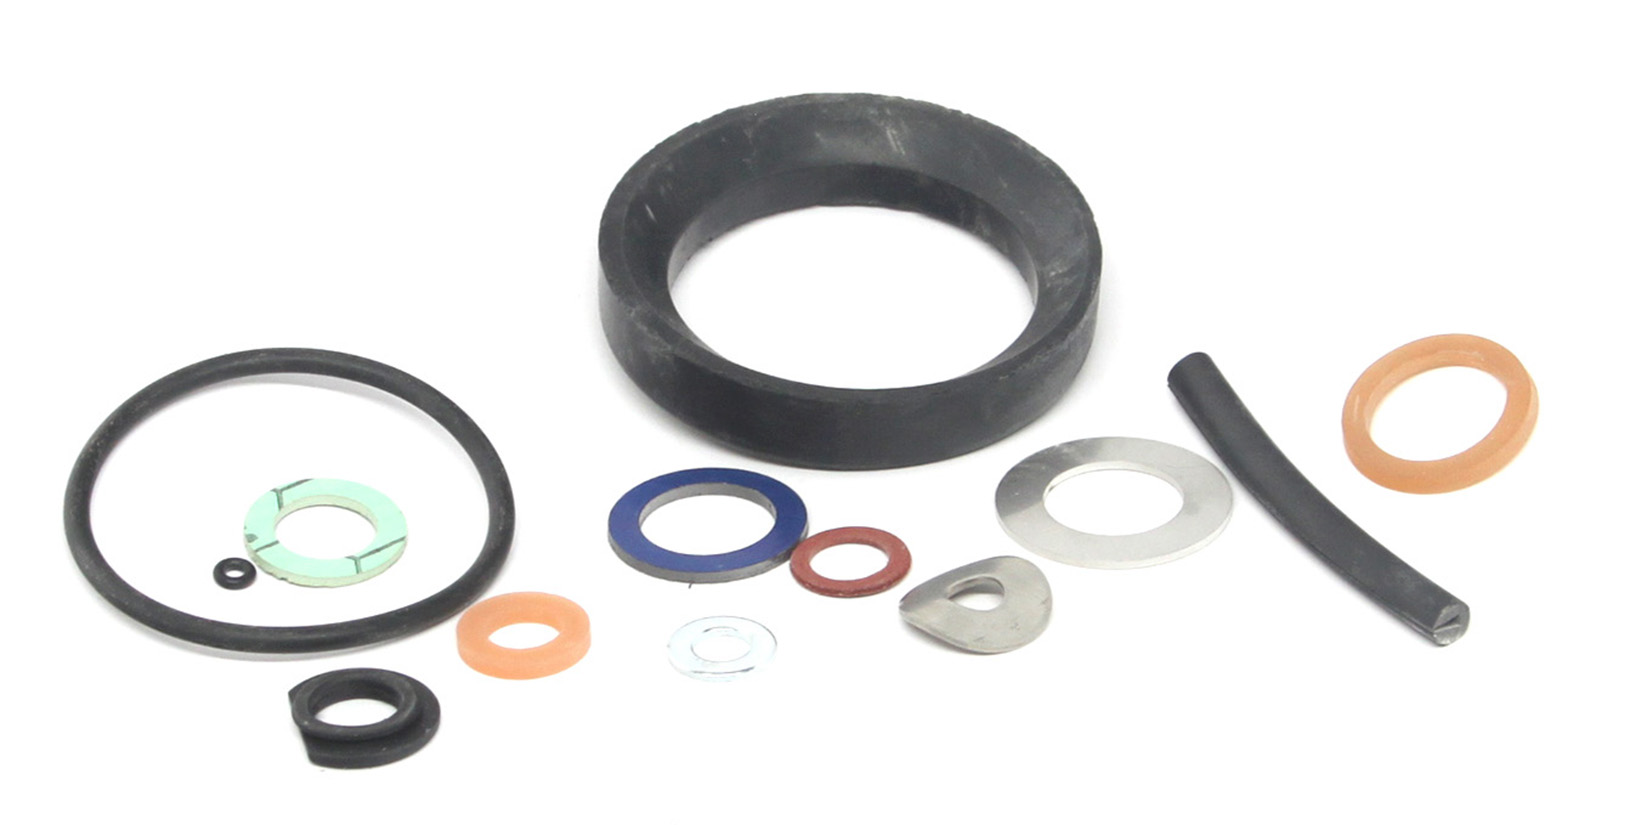 Gaskets, Washers, and O-rings